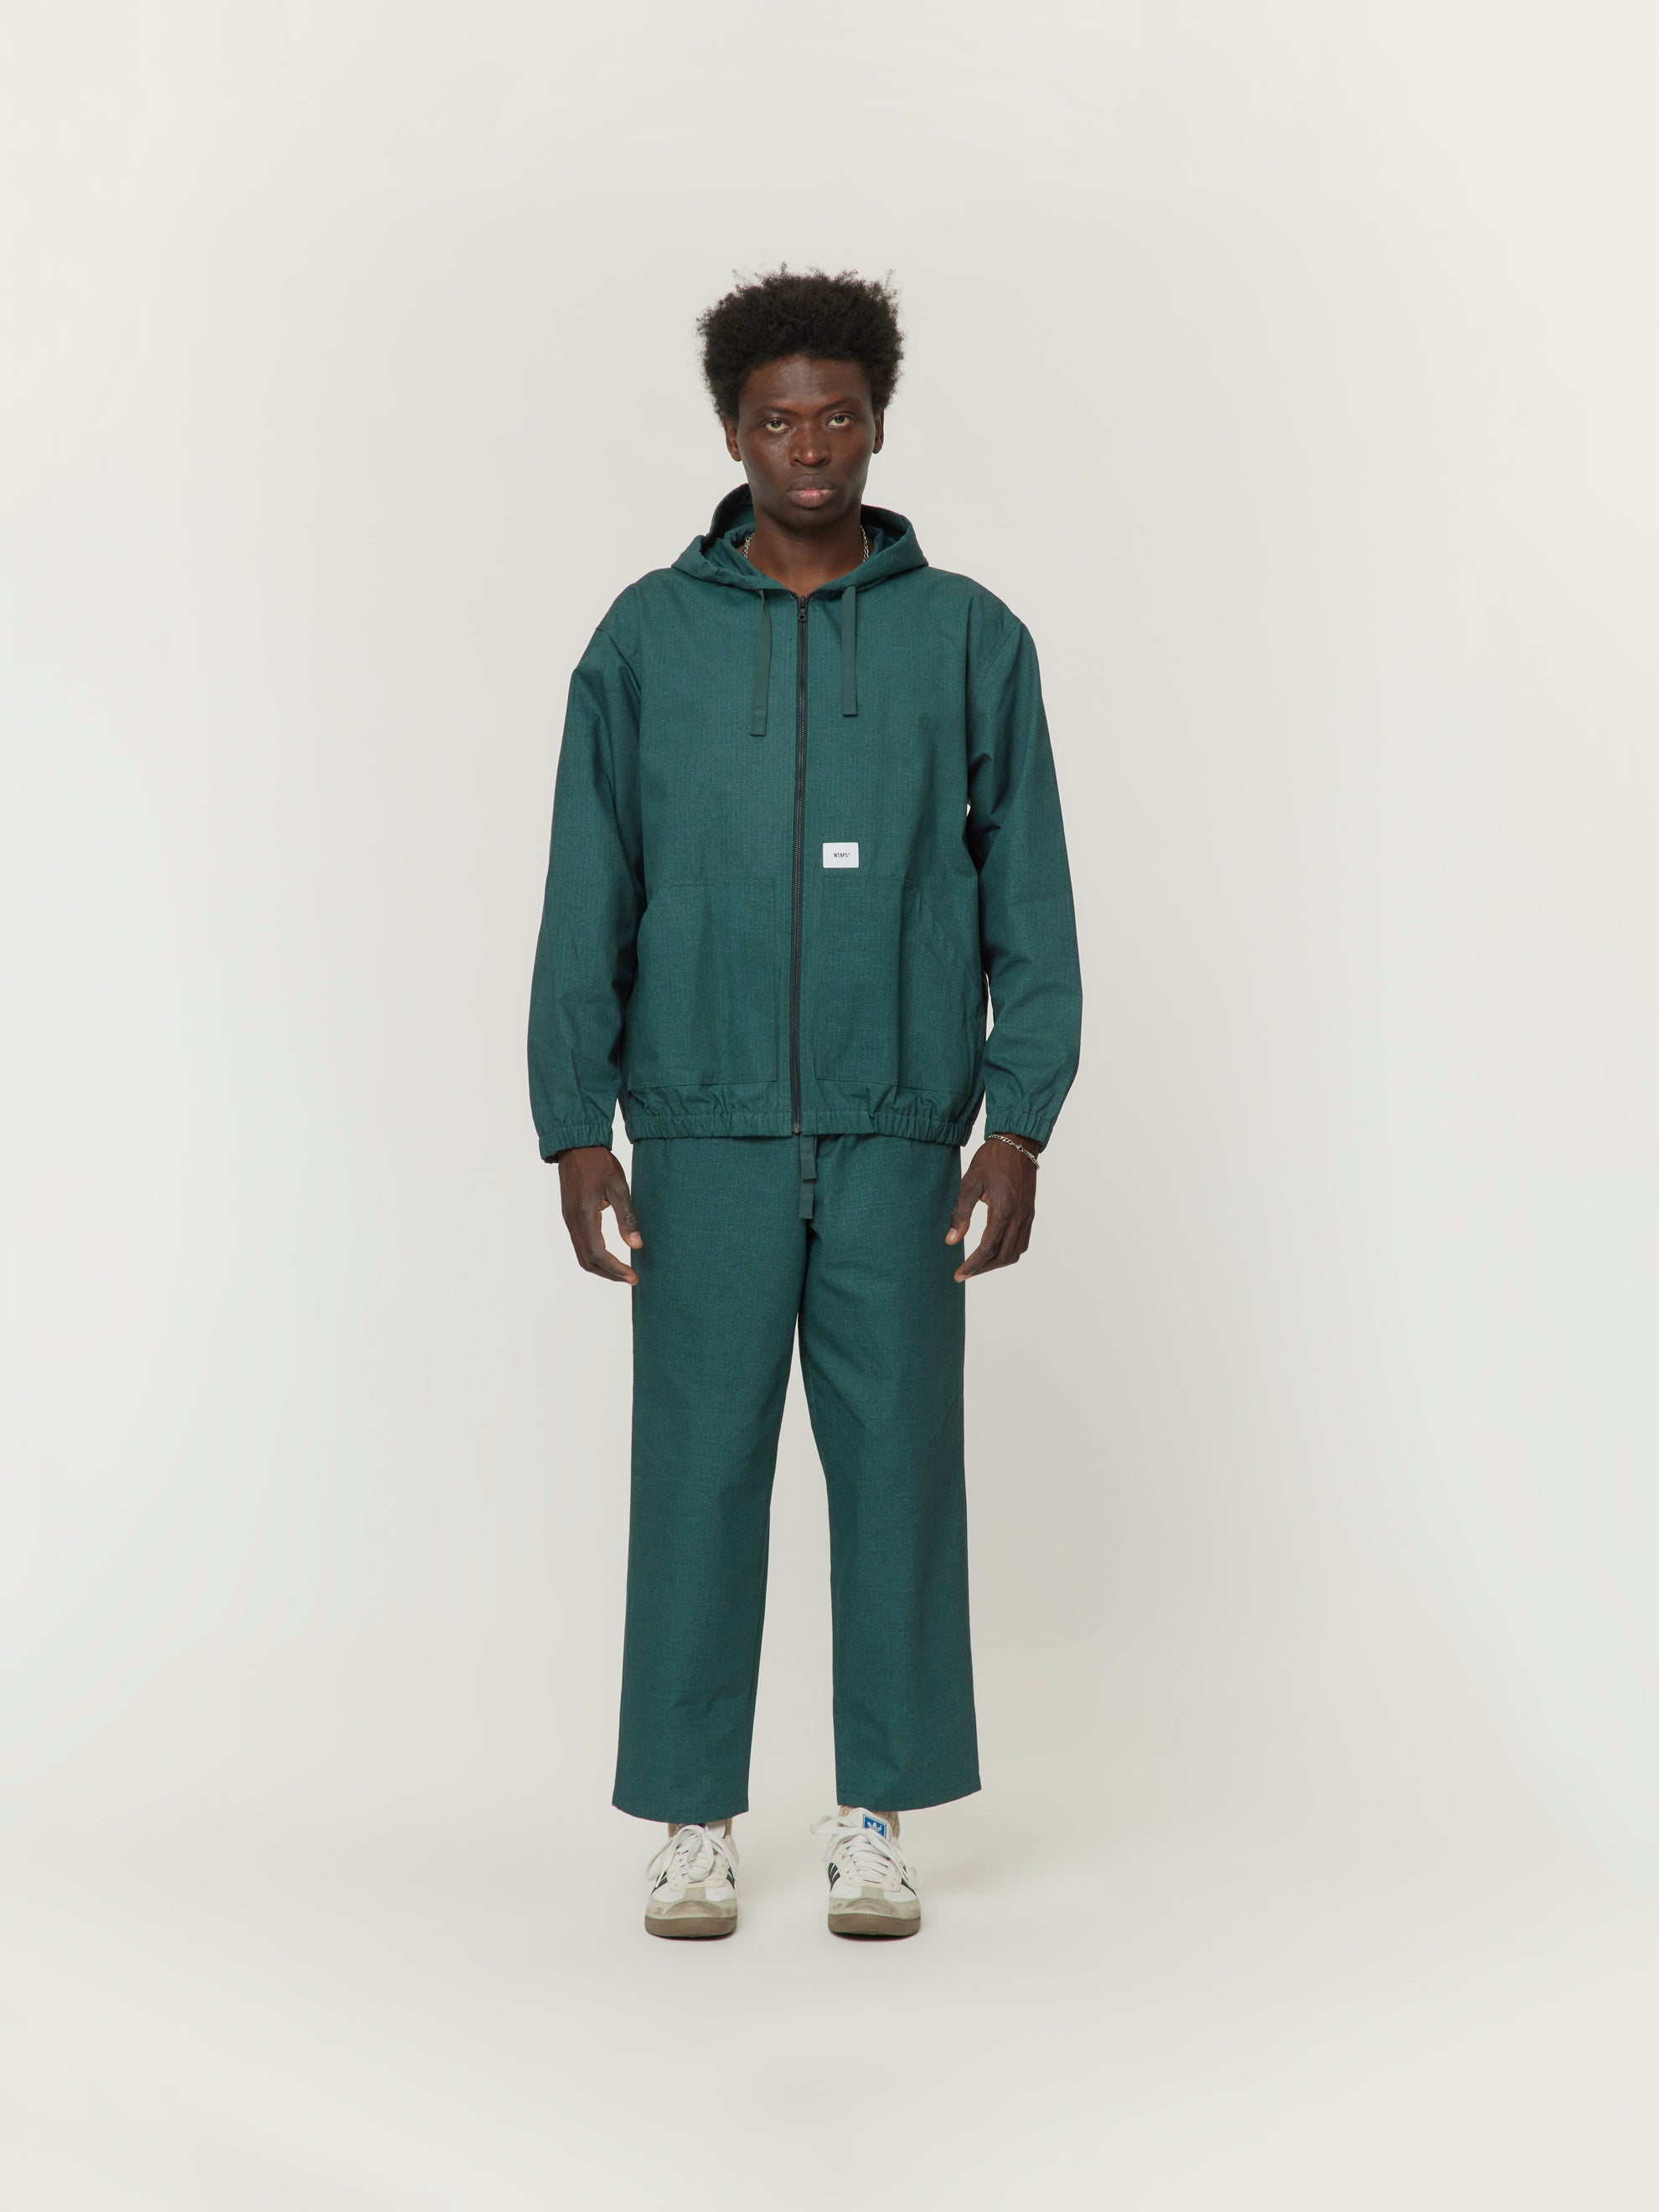 Buy Wtaps PAB / JACKET / COTTON. RIPSTOP Online at UNION LOS ANGELES